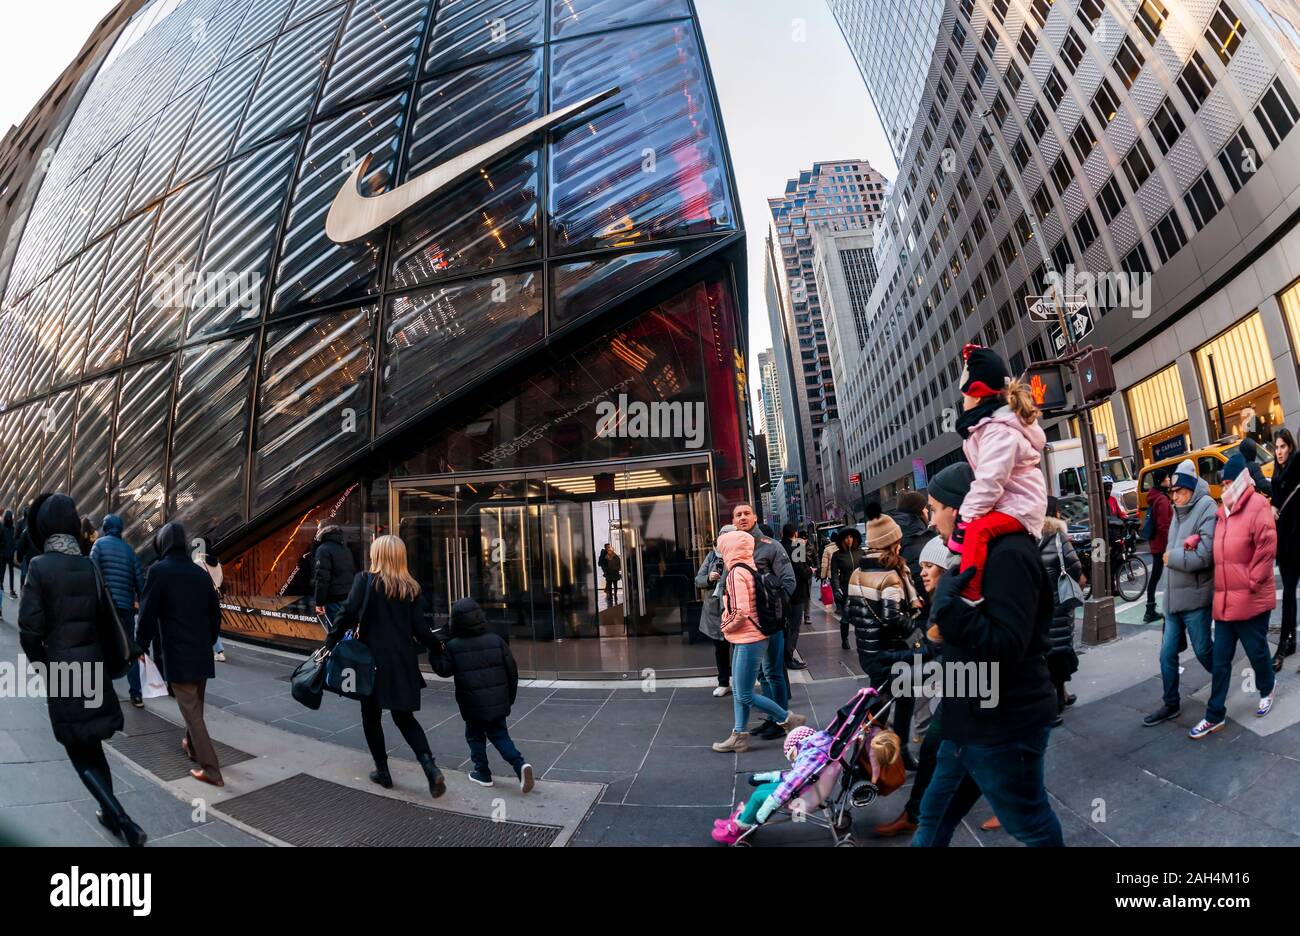 Shoppers and visitors outside the Nike “House of Innovation” flagship store  on Fifth avenue in New York on Thursday, December 19, 2019. Nike is  expected to release its second-quarter earnings after the